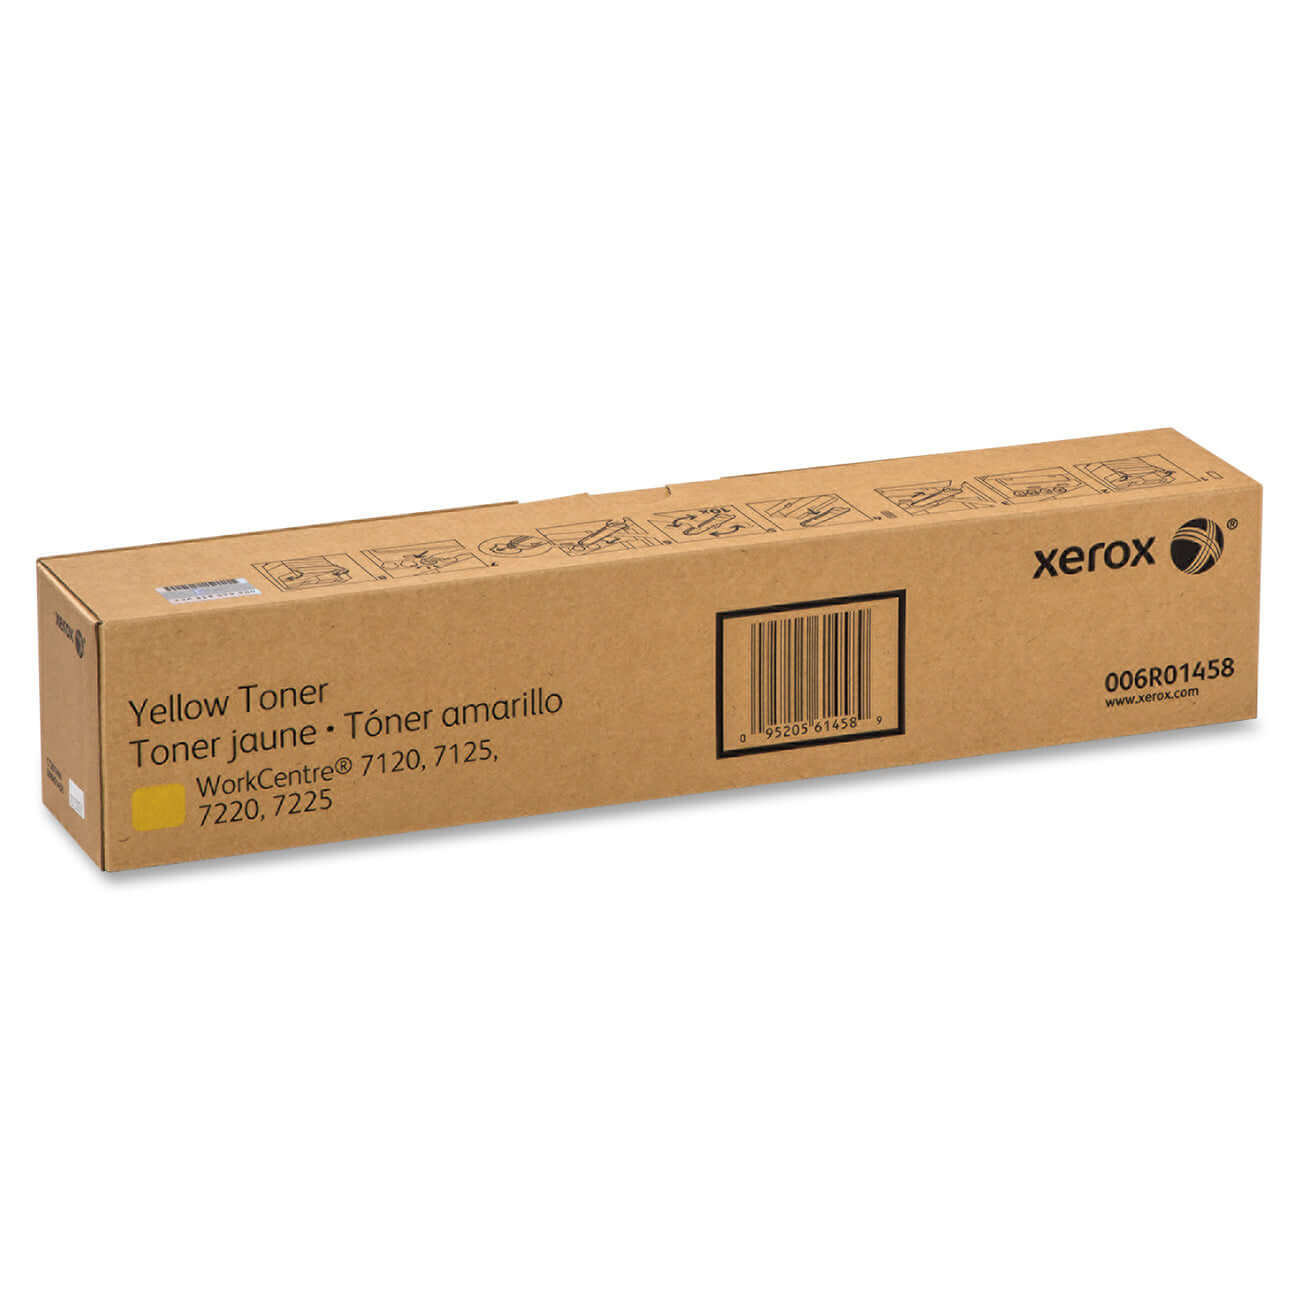 Xerox Yellow Toner Cartridge Sold (15,000) 006R01458 for WorkCentre 7120/7125/7220/7225/7220i/7225i-Scriptum Supplies